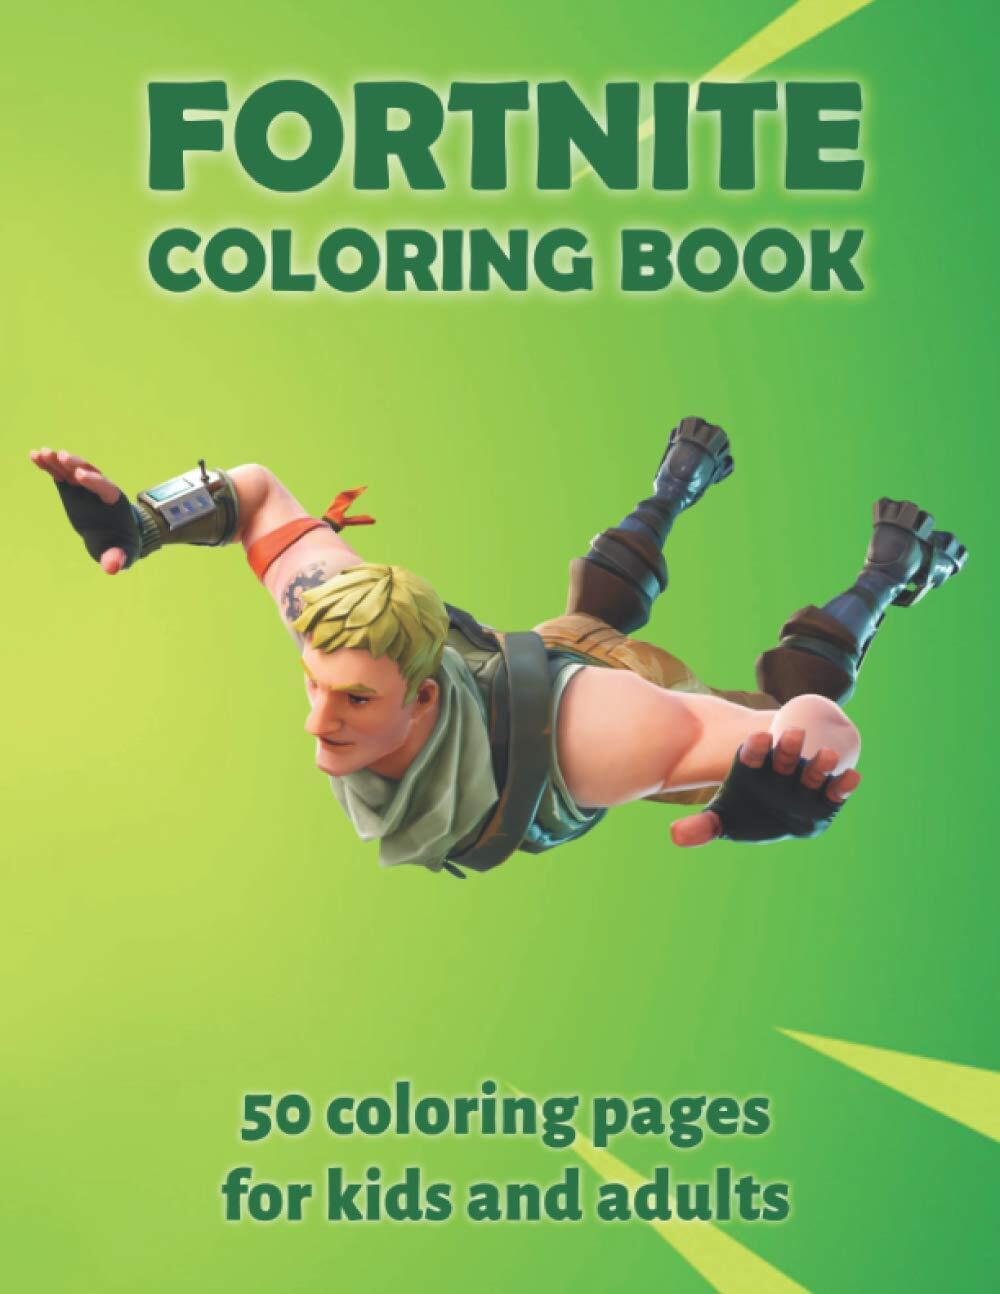 Fortnite Coloring Book - 50 Coloring Pages